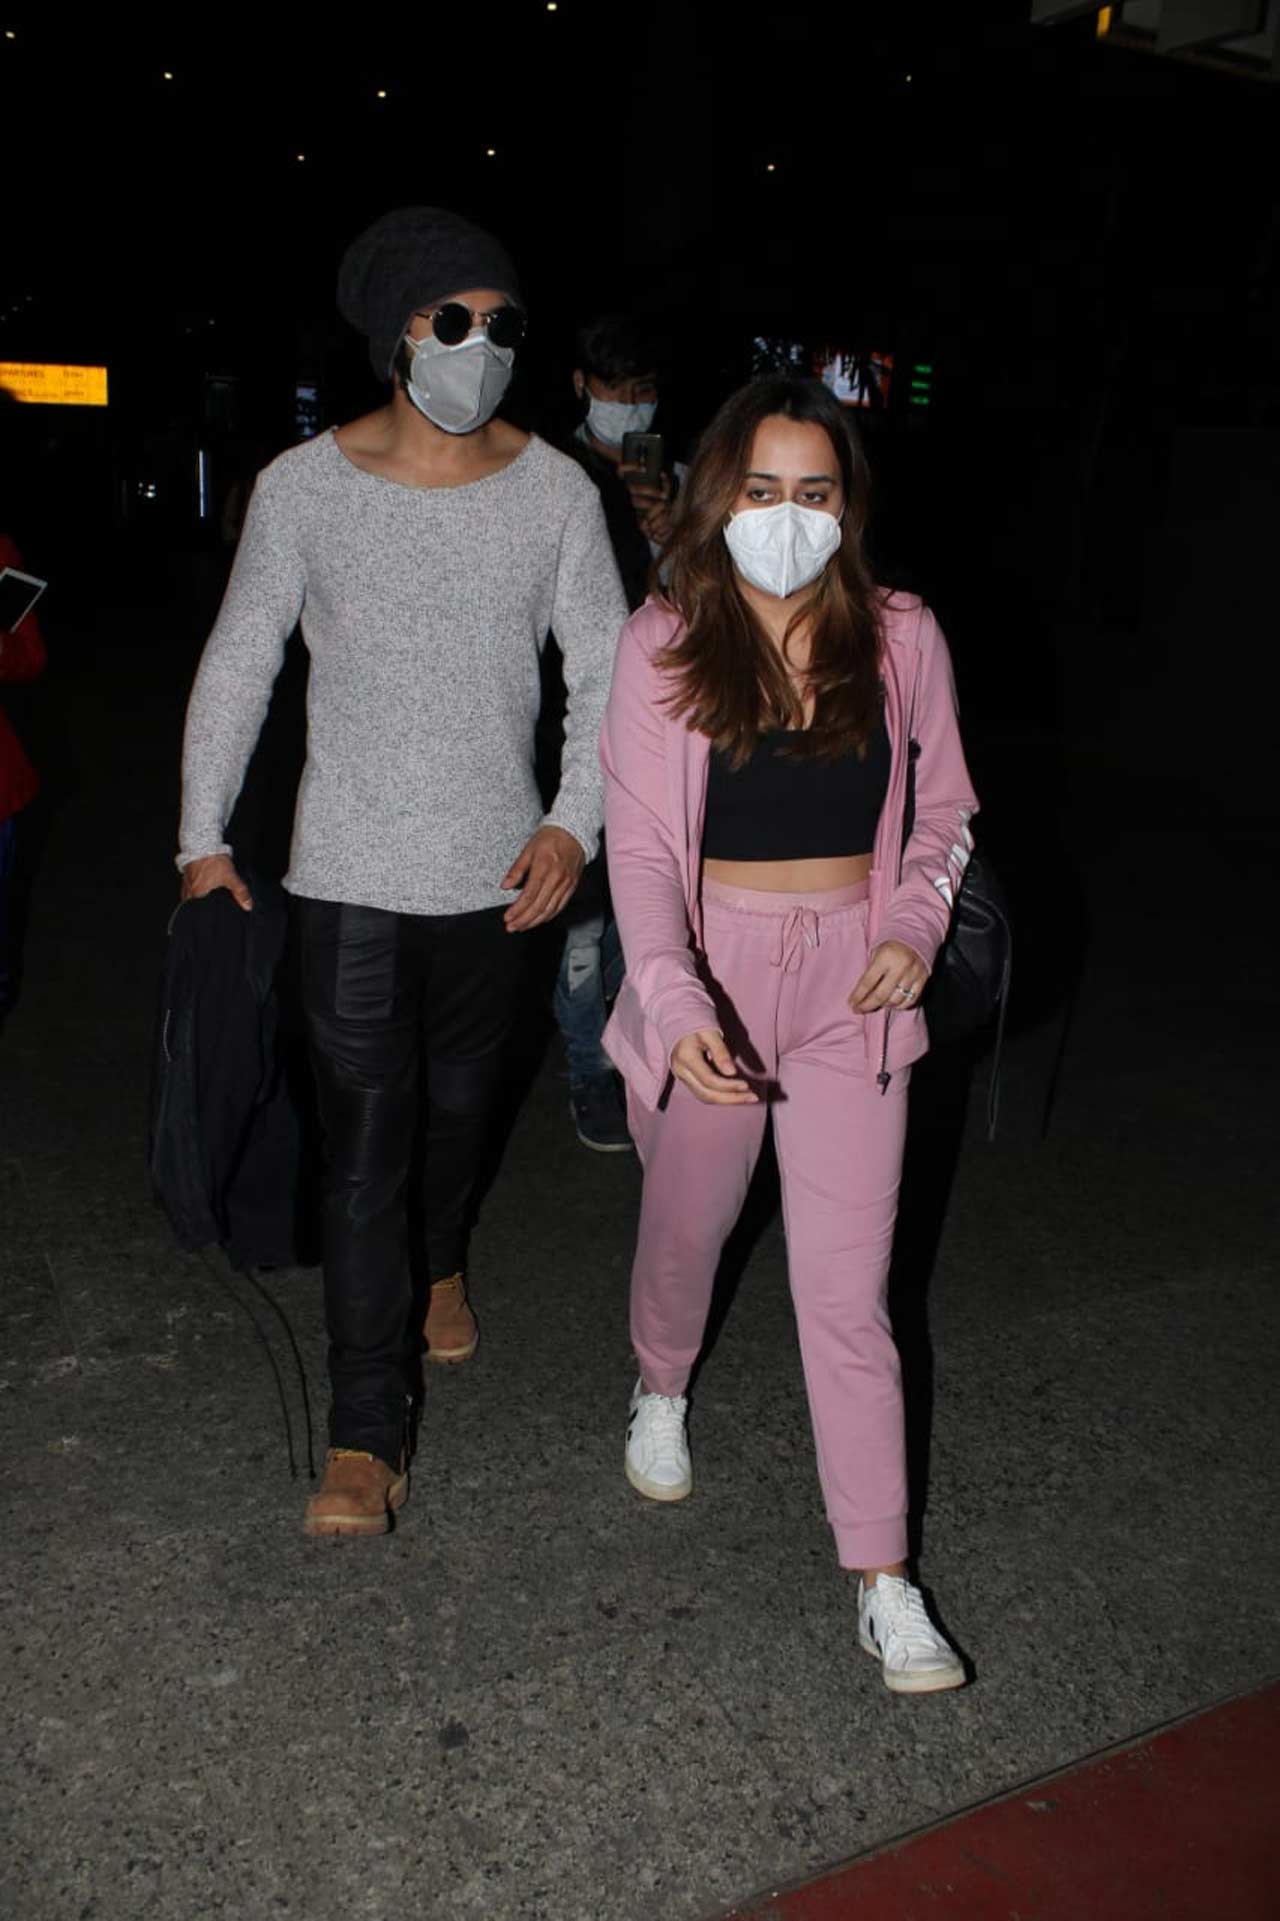 Varun Dhawan and Natasha Dalal were snapped at the Mumbai airport. The actor, on the work front, recently completed shooting for Bhediya, which also stars Kriti Sanon. While Varun Dhawan opted for a grey t-shirt, paired with black pants, Natasha Dalal sported pink athleisure during the outing. All pictures/Yogen Shah